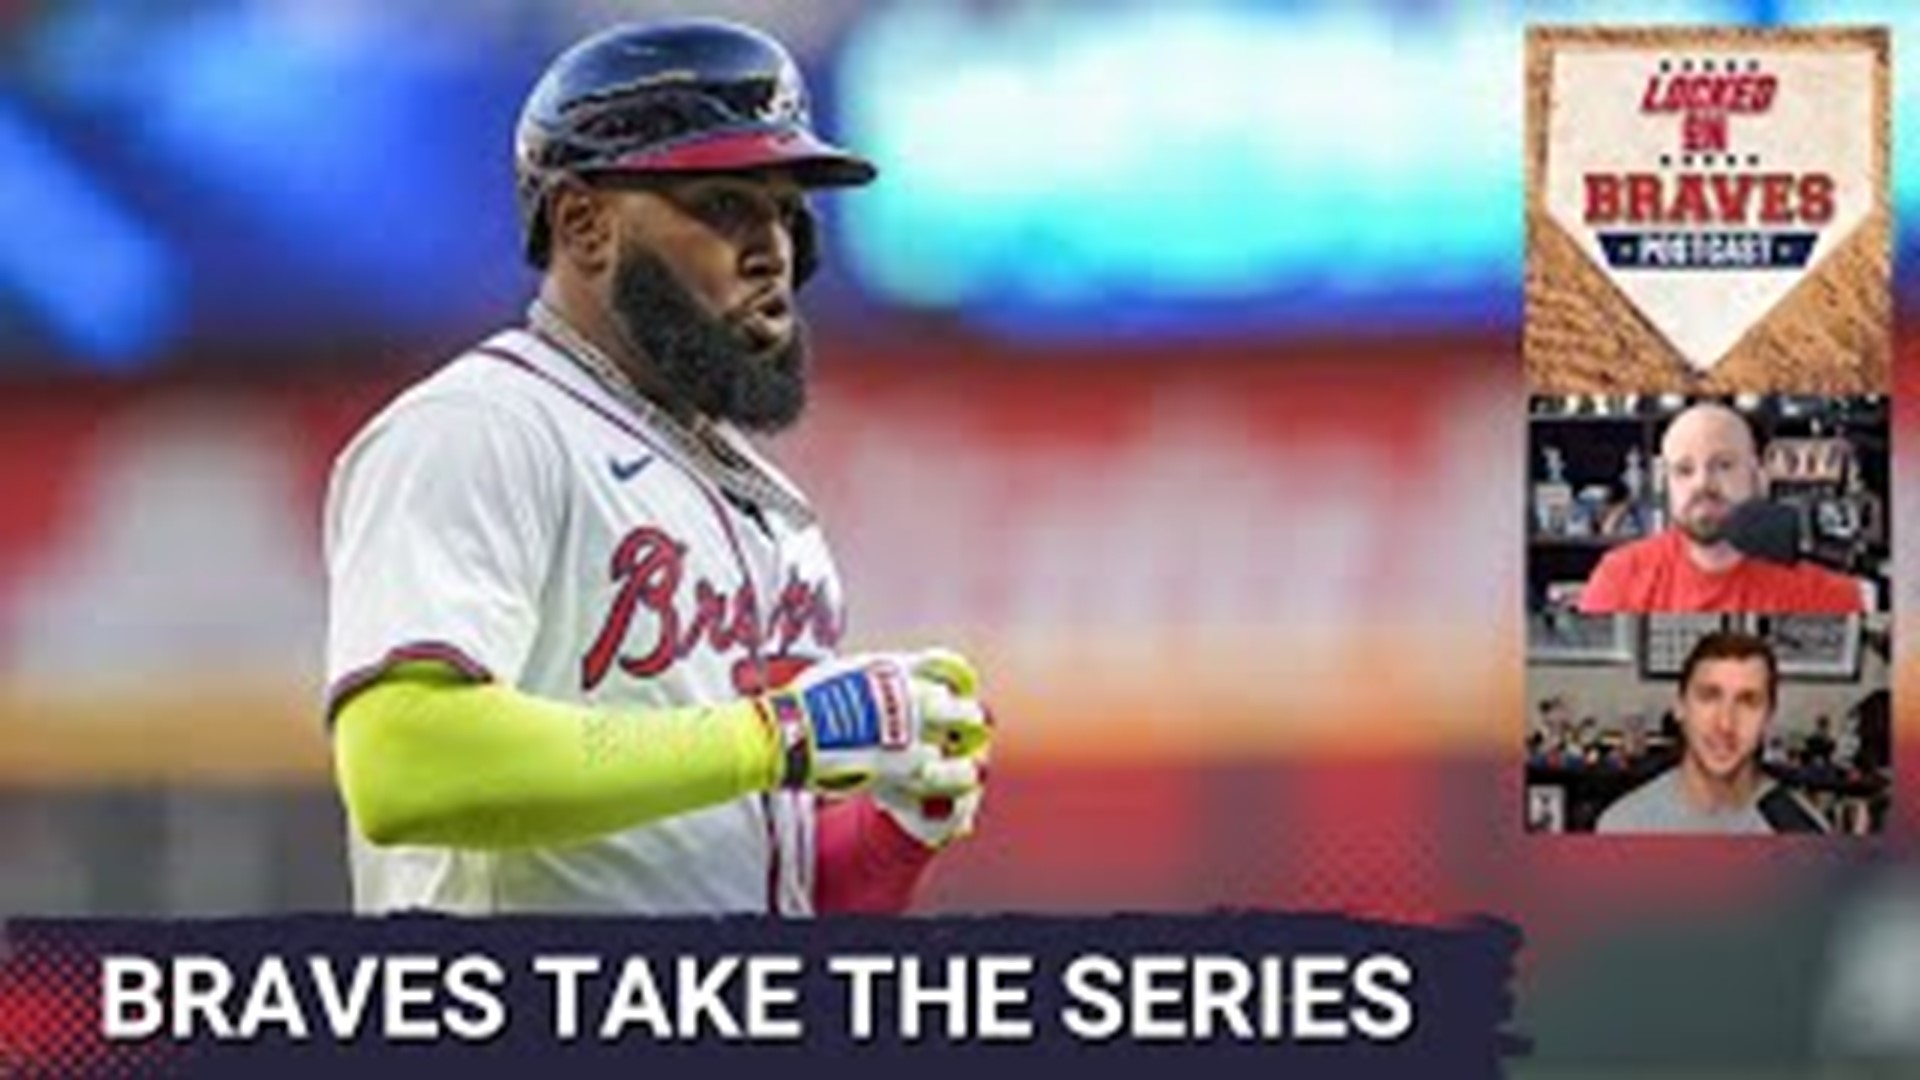 The Atlanta Braves took a weekend series from the defending World Series champion Texas Rangers at Truist Park despite having their six-game winning streak snapped.